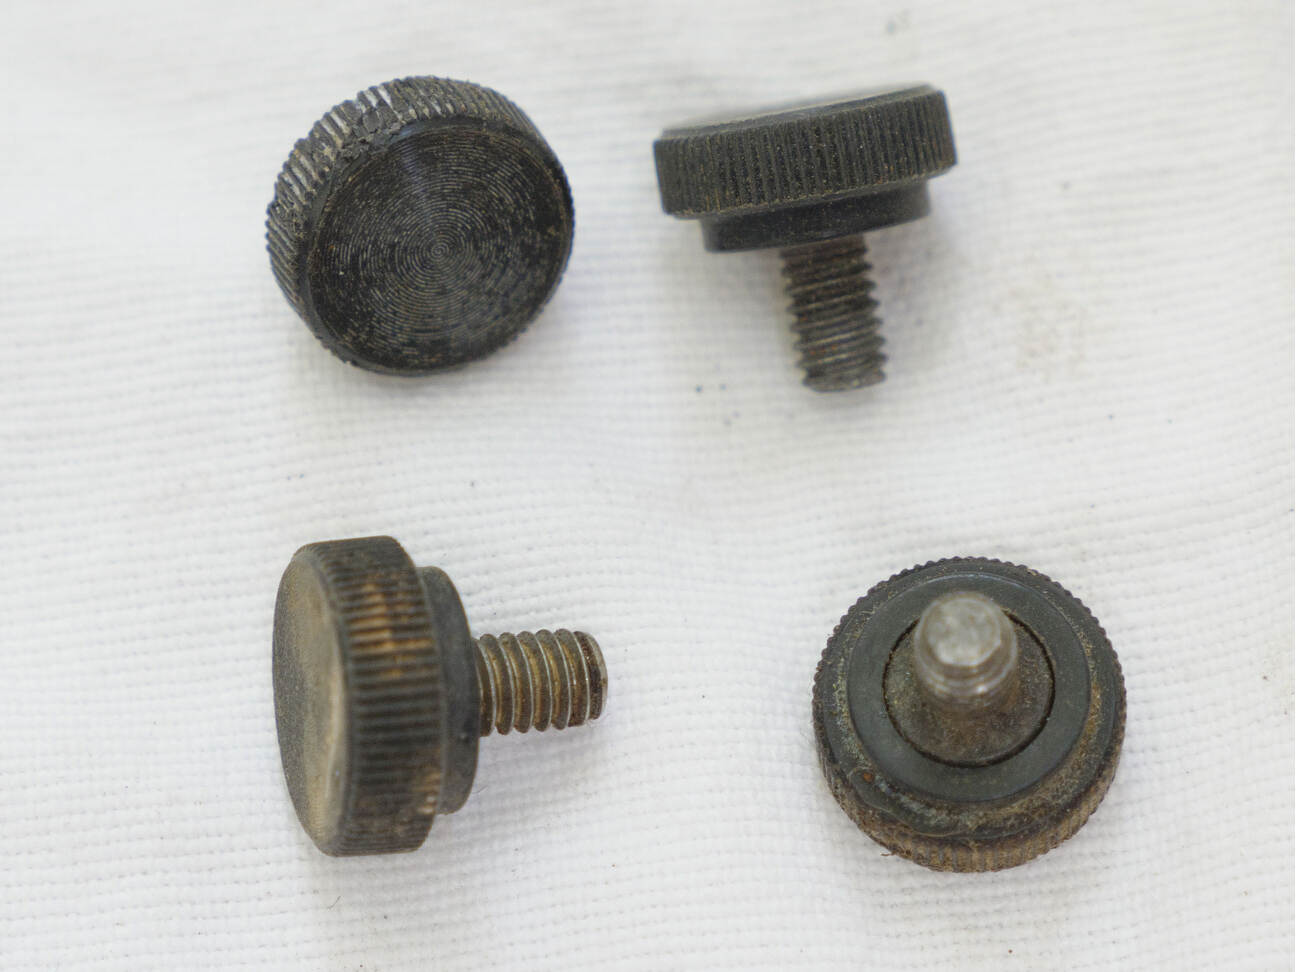 used side body thumb screw to hold in valve body/asa.  Steel screw with plastic cap, 1x screw